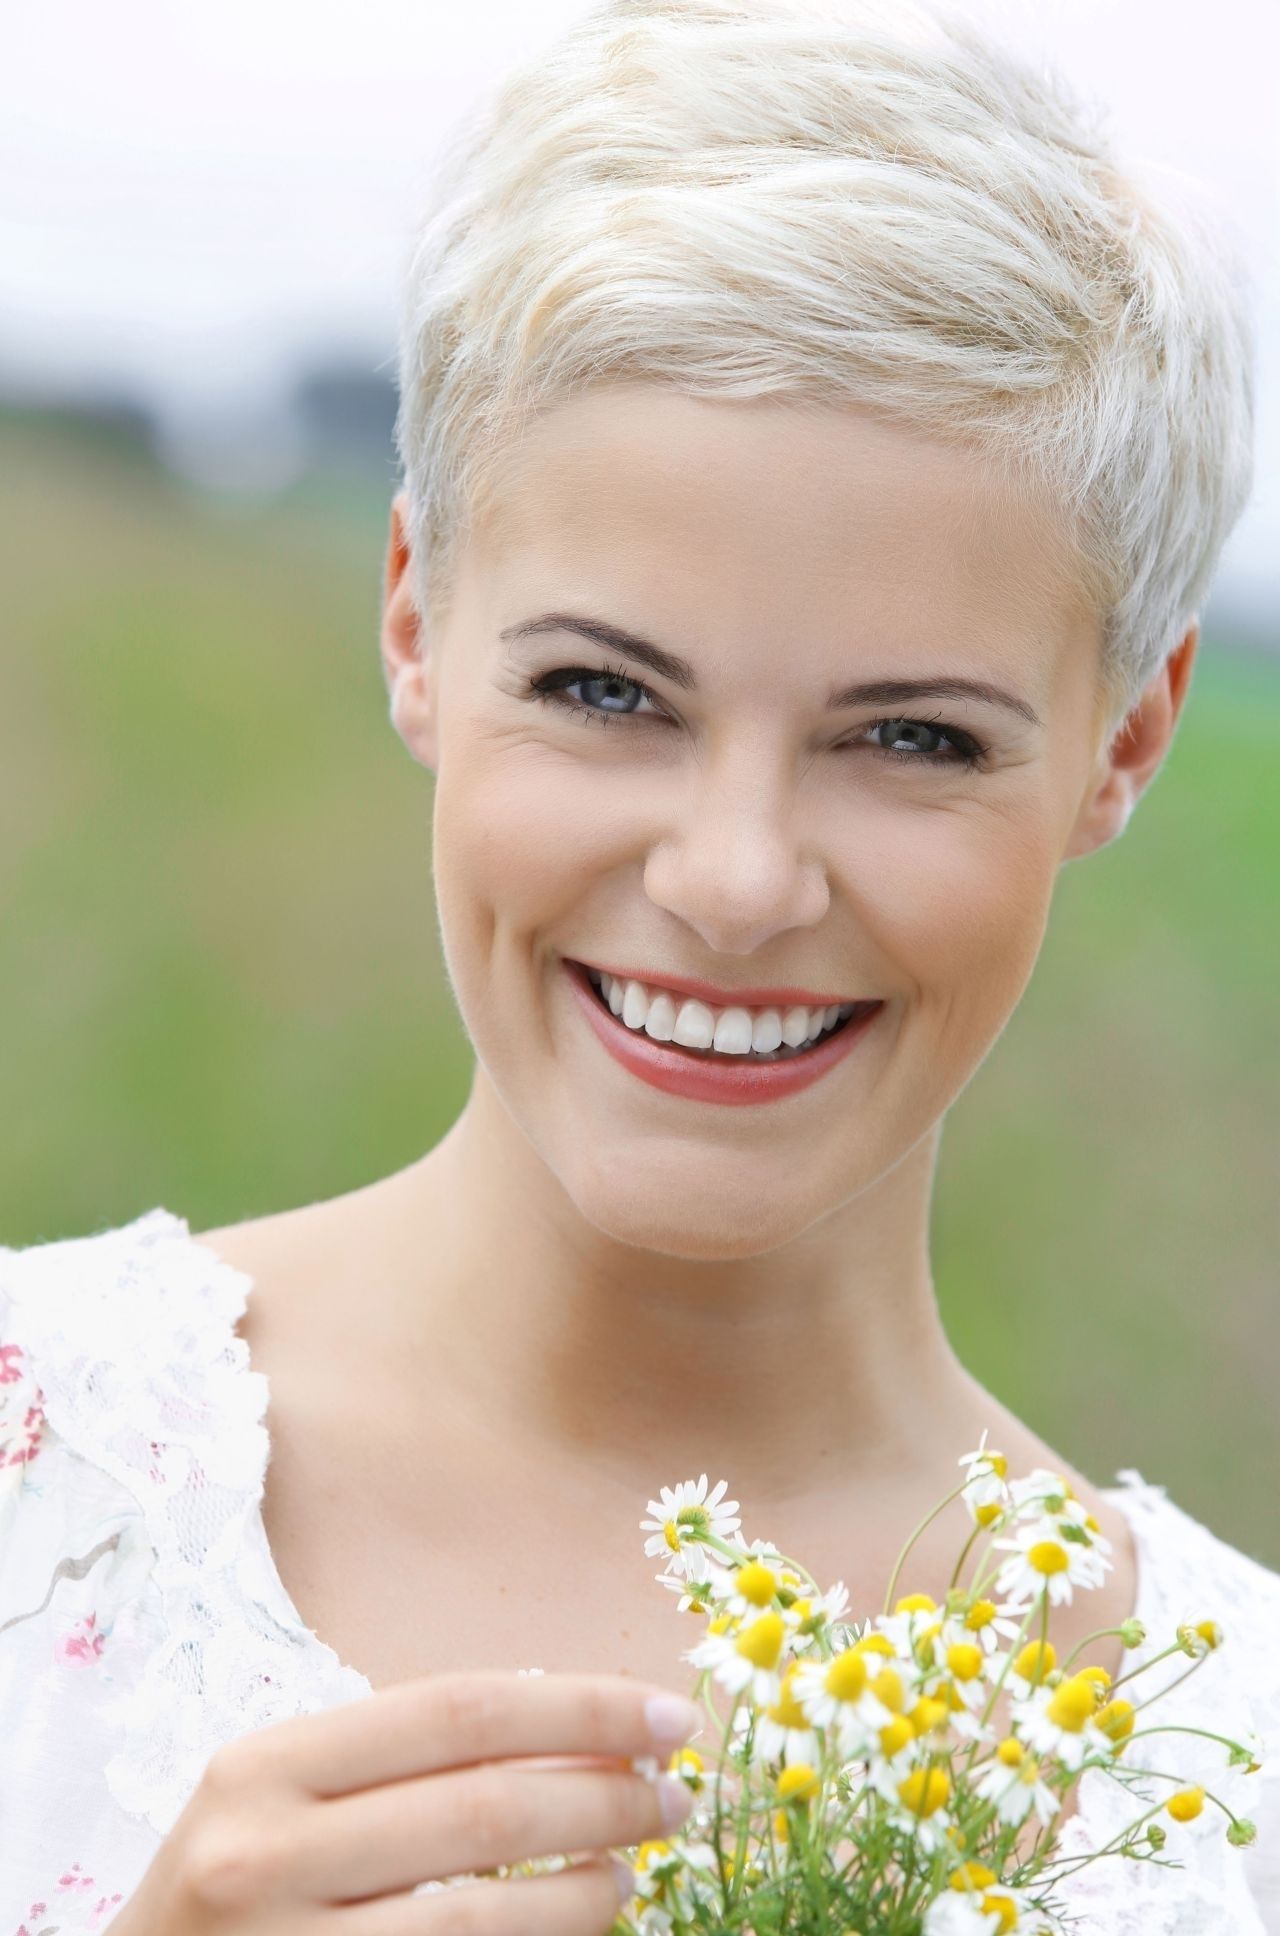 Short Pixie Haircut New Short Blonde Hairstyles Short Hairstyles Most With Regard To Current Very Short Pixie Hairstyles For Women (View 7 of 15)